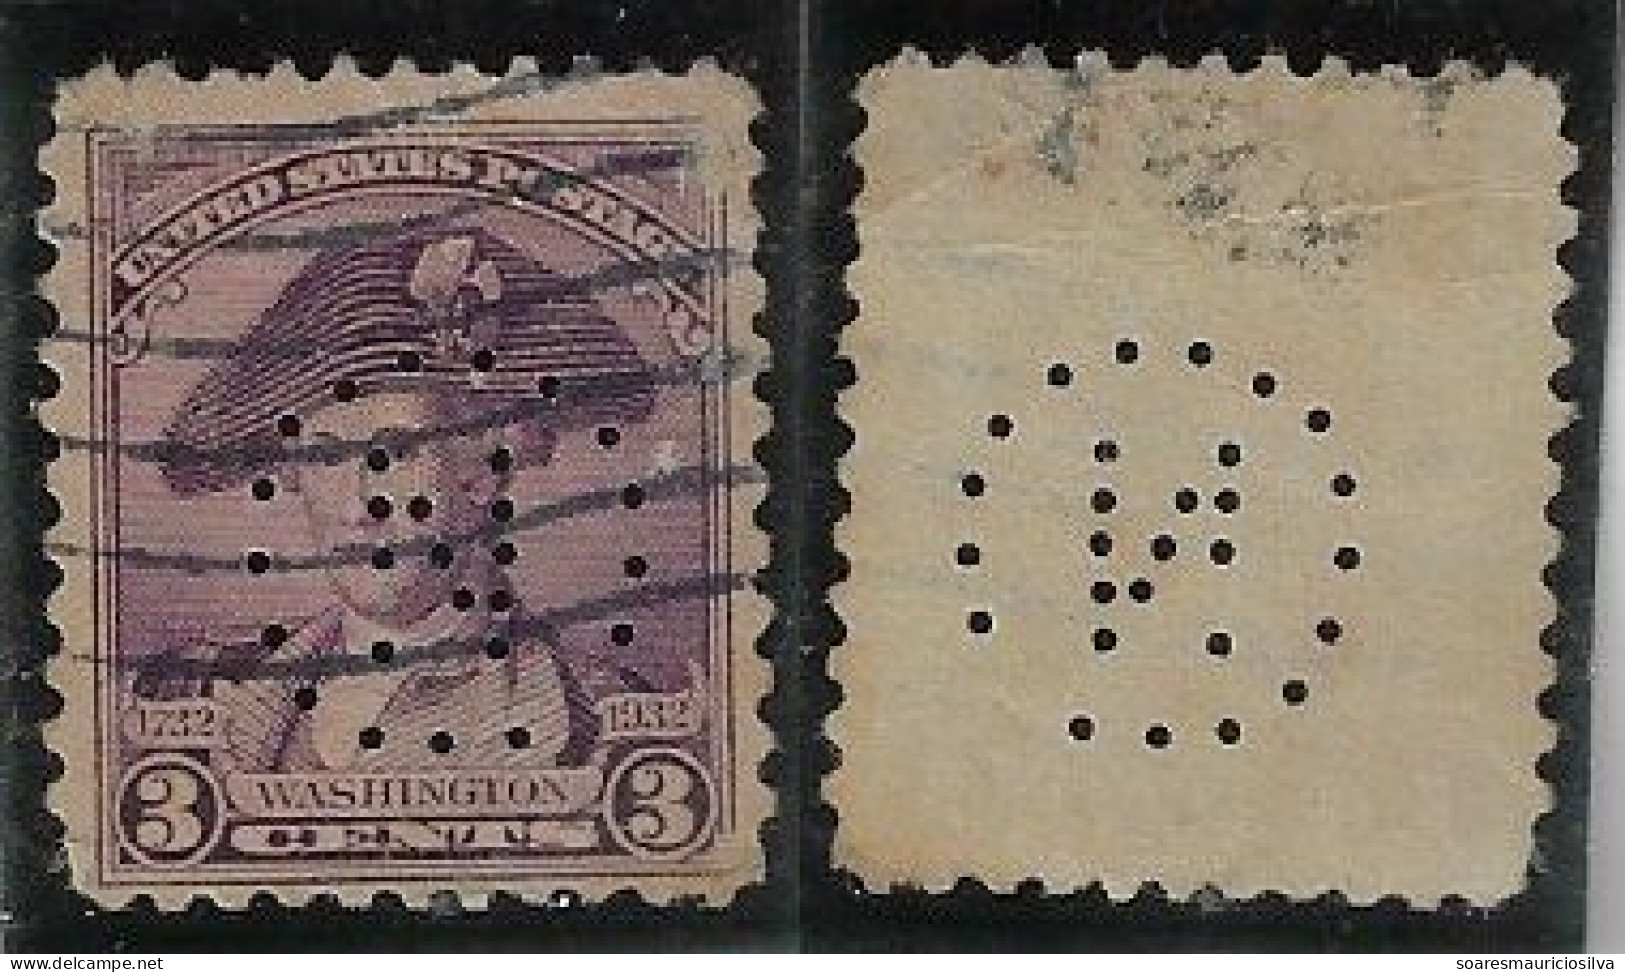 USA United States 1926/1965 Stamp With Perfin N (Circle) By Norton Company From Worcester Lochung Perfore - Perforados